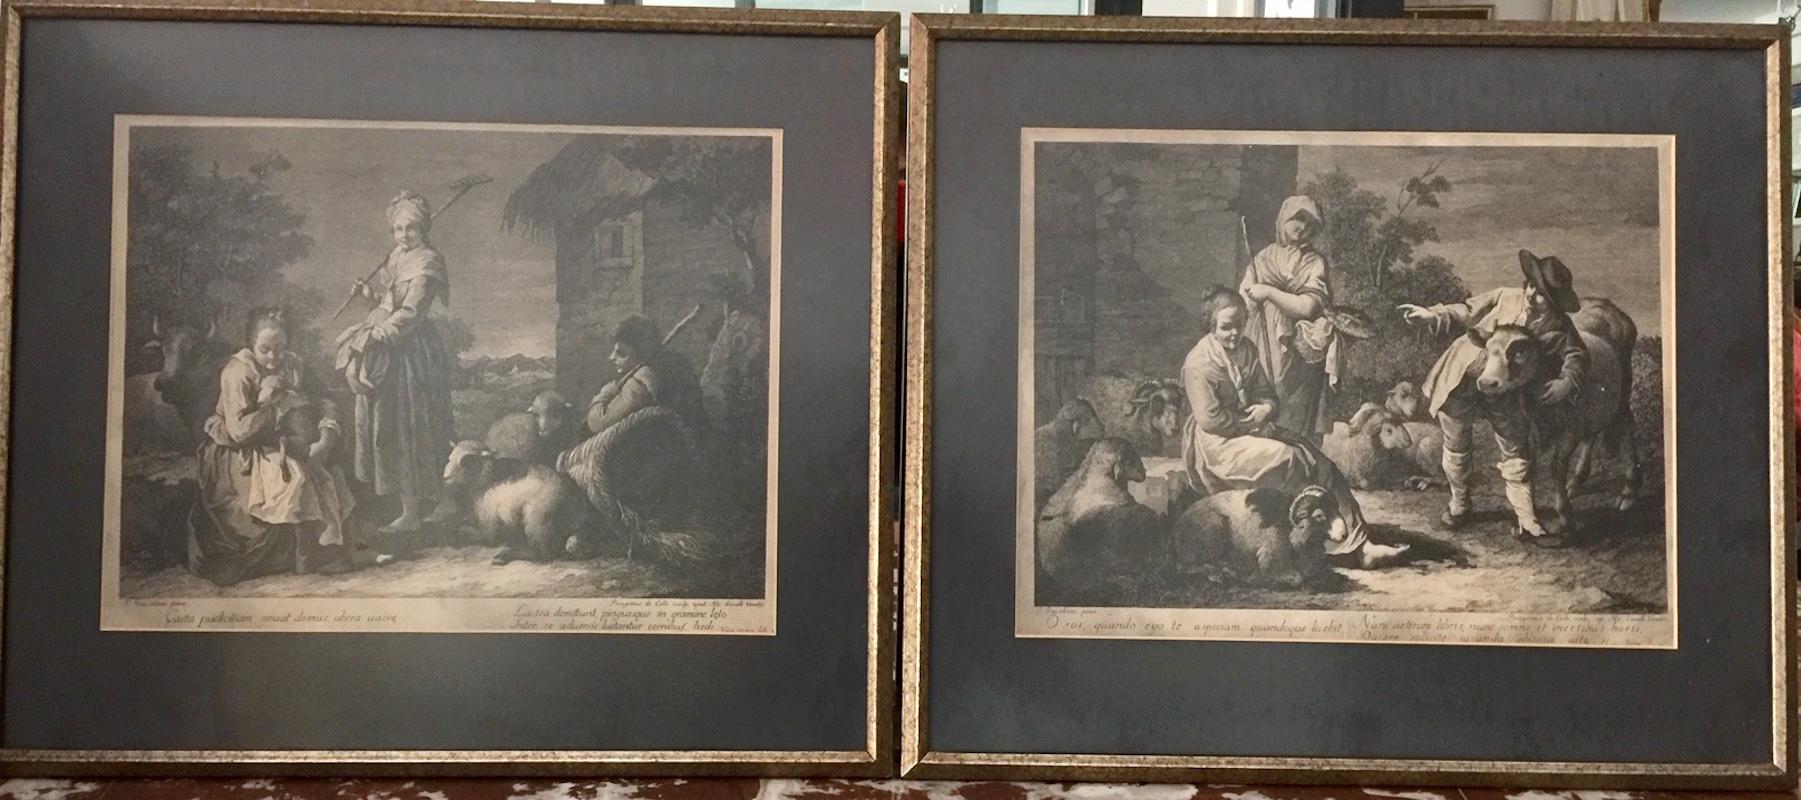 Pair of French monochromatic prints (Etchings)
A beautiful pair of Prints (etchings) of a French farm yard including various farm animals such as rams, sheep and cows.
Gold frames with black mats underscoring the monochromatic compositions, The